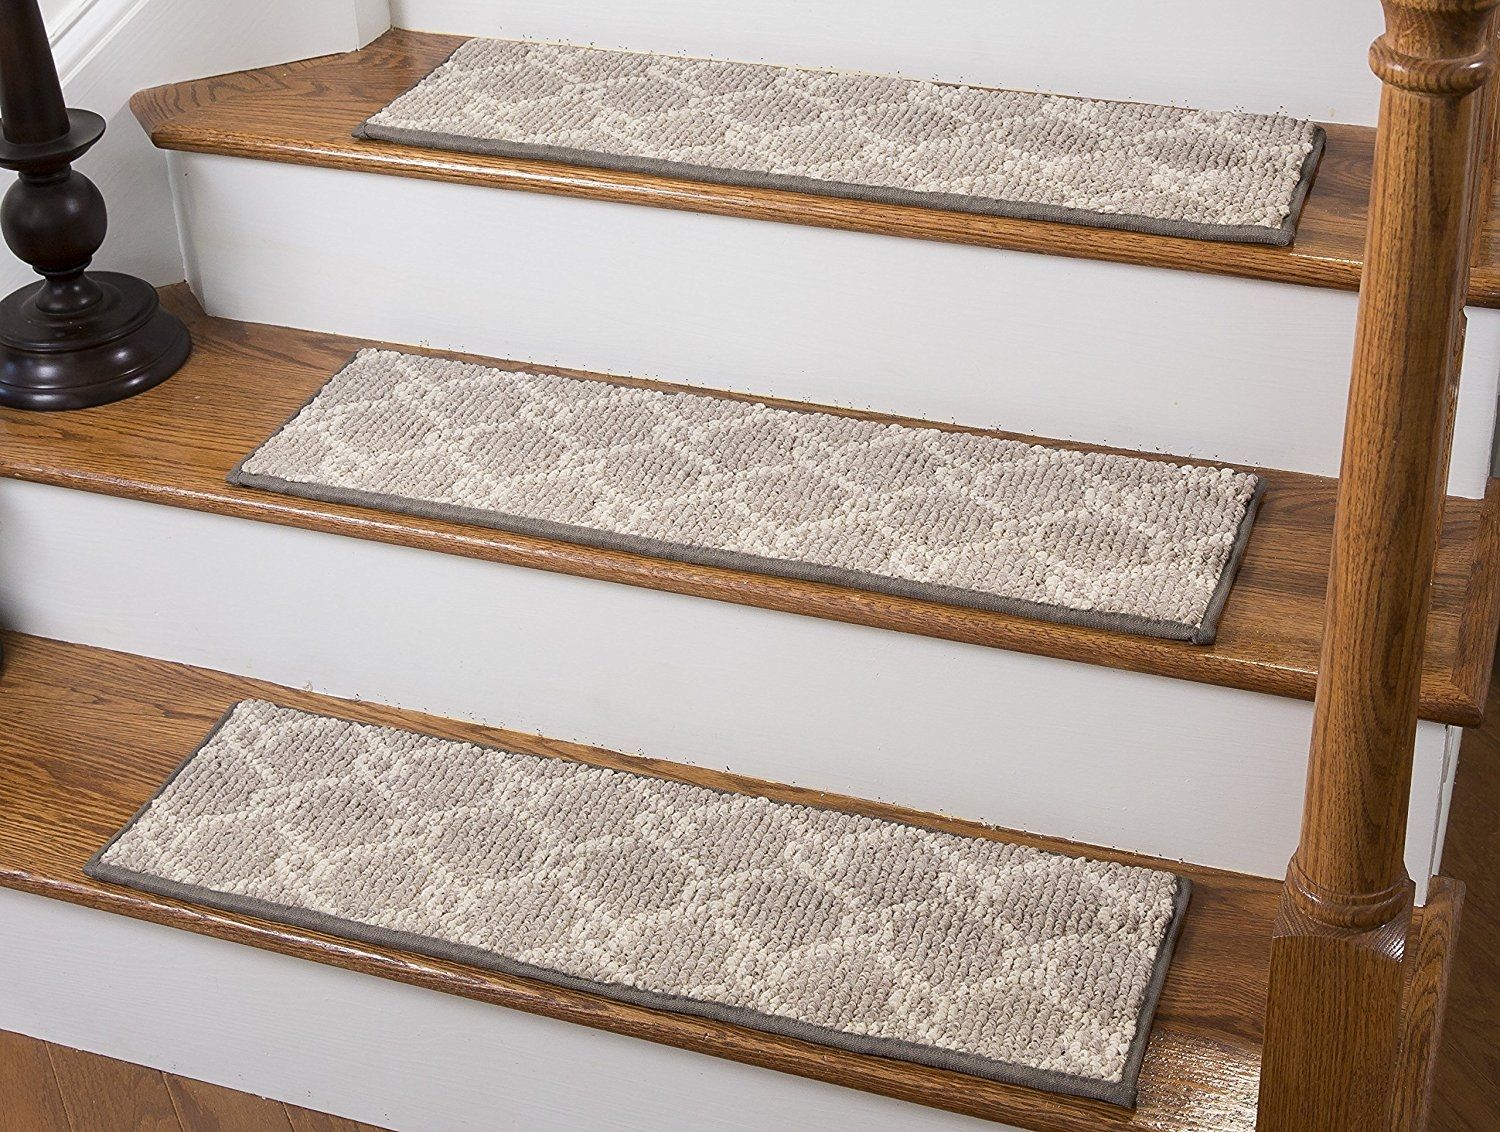 Decor Parterre Traditional Wool Inspired Carpet Stair Tread With Inside Adhesive Carpet Stair Treads (View 13 of 20)